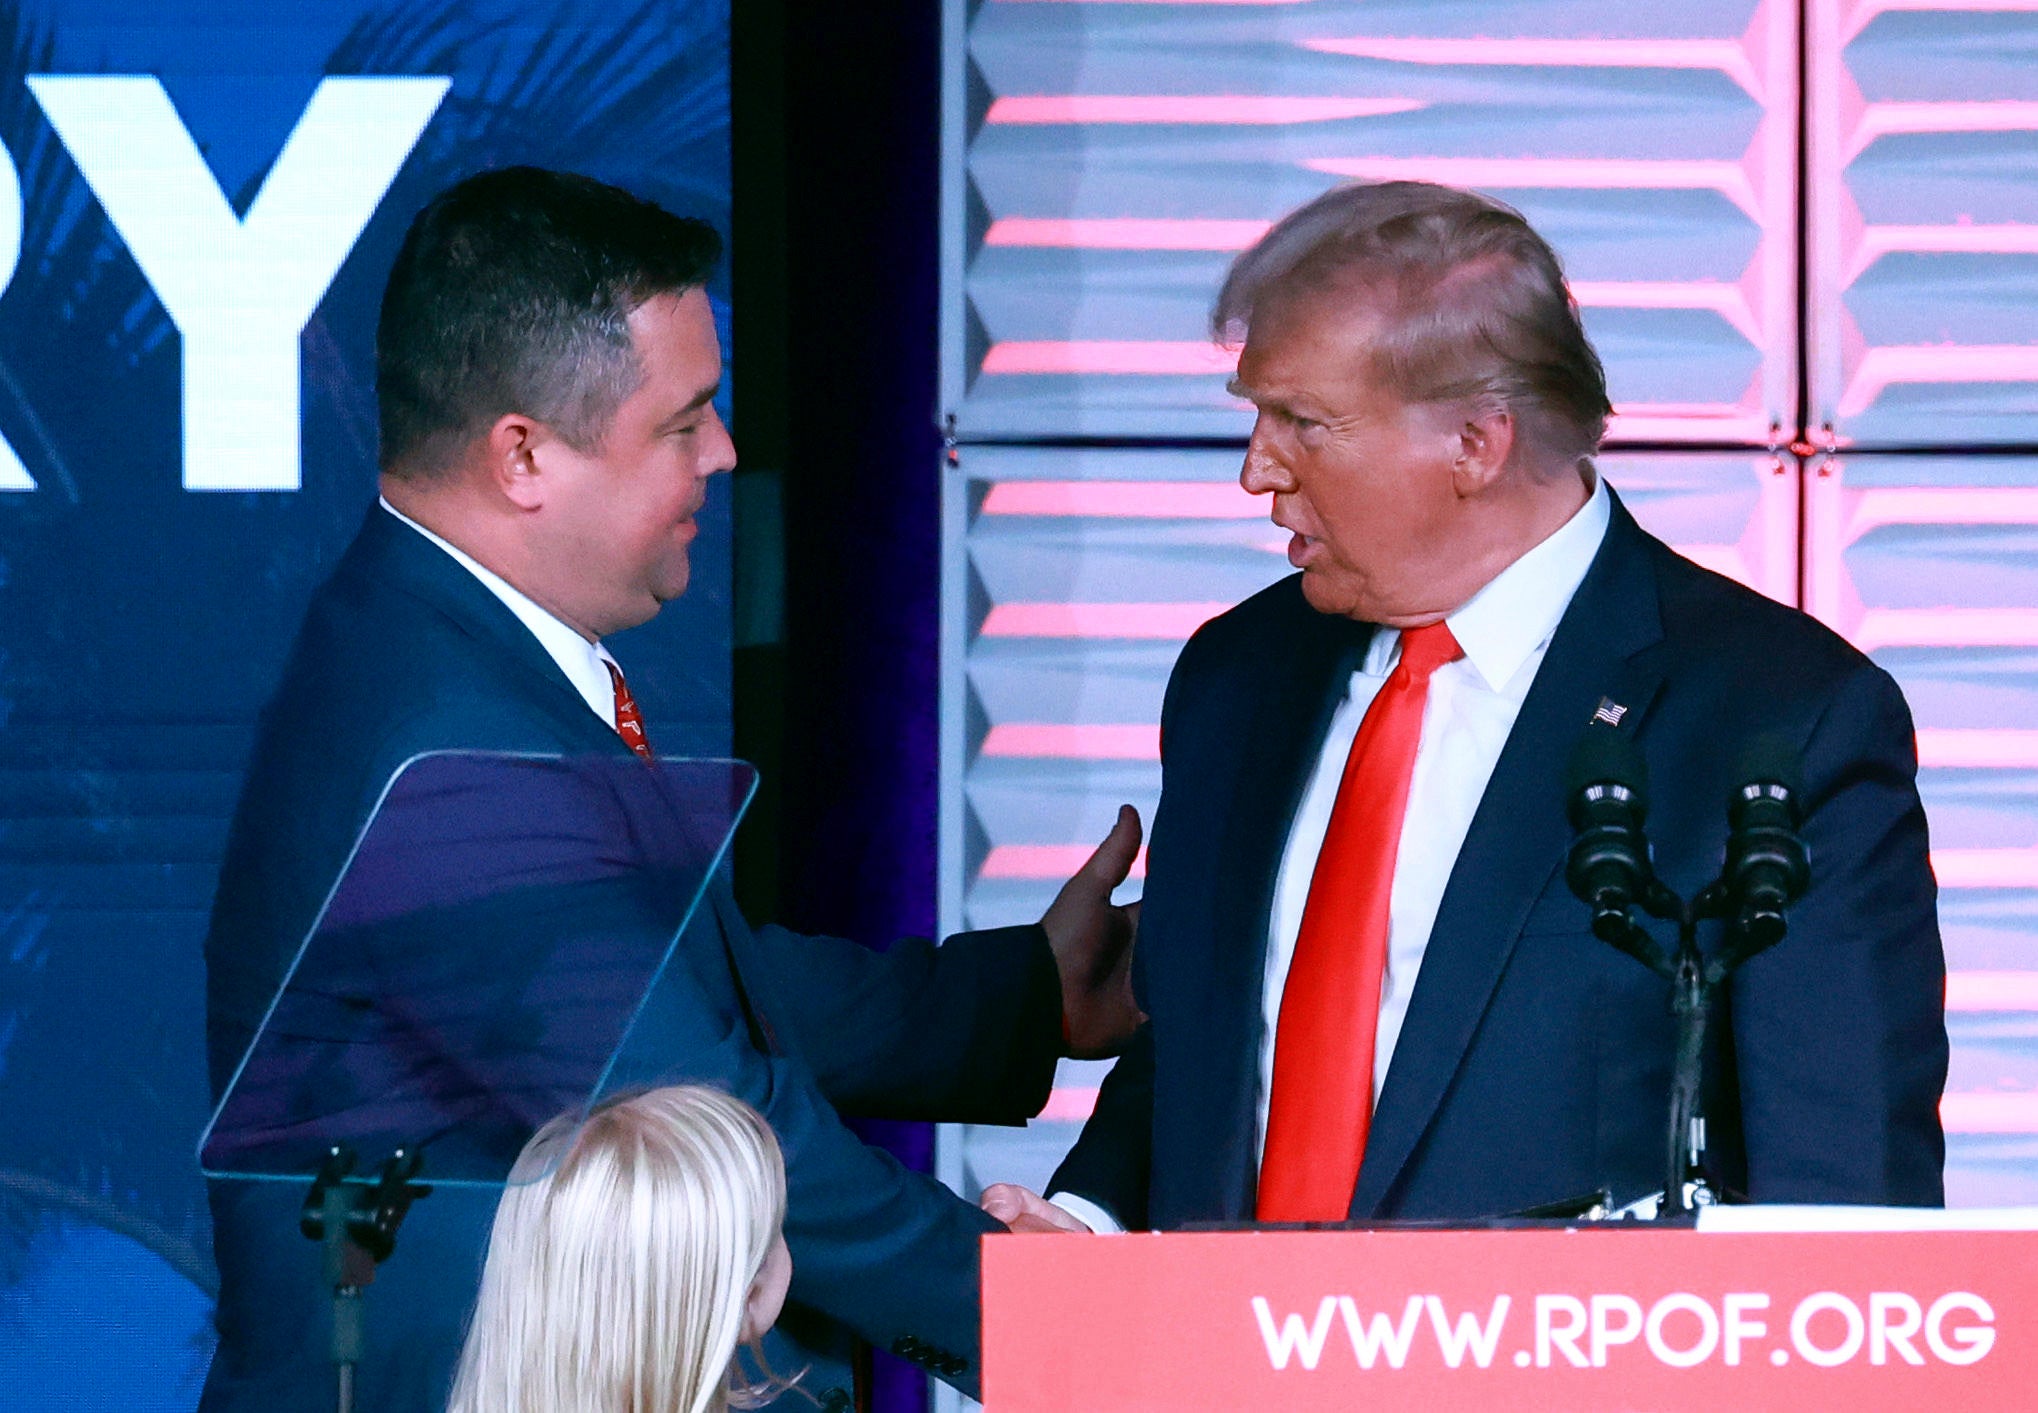 Republican Party of Florida chairman Christian Ziegler, left, greets former president Donald Trump at the RPOF Freedom Summit in November